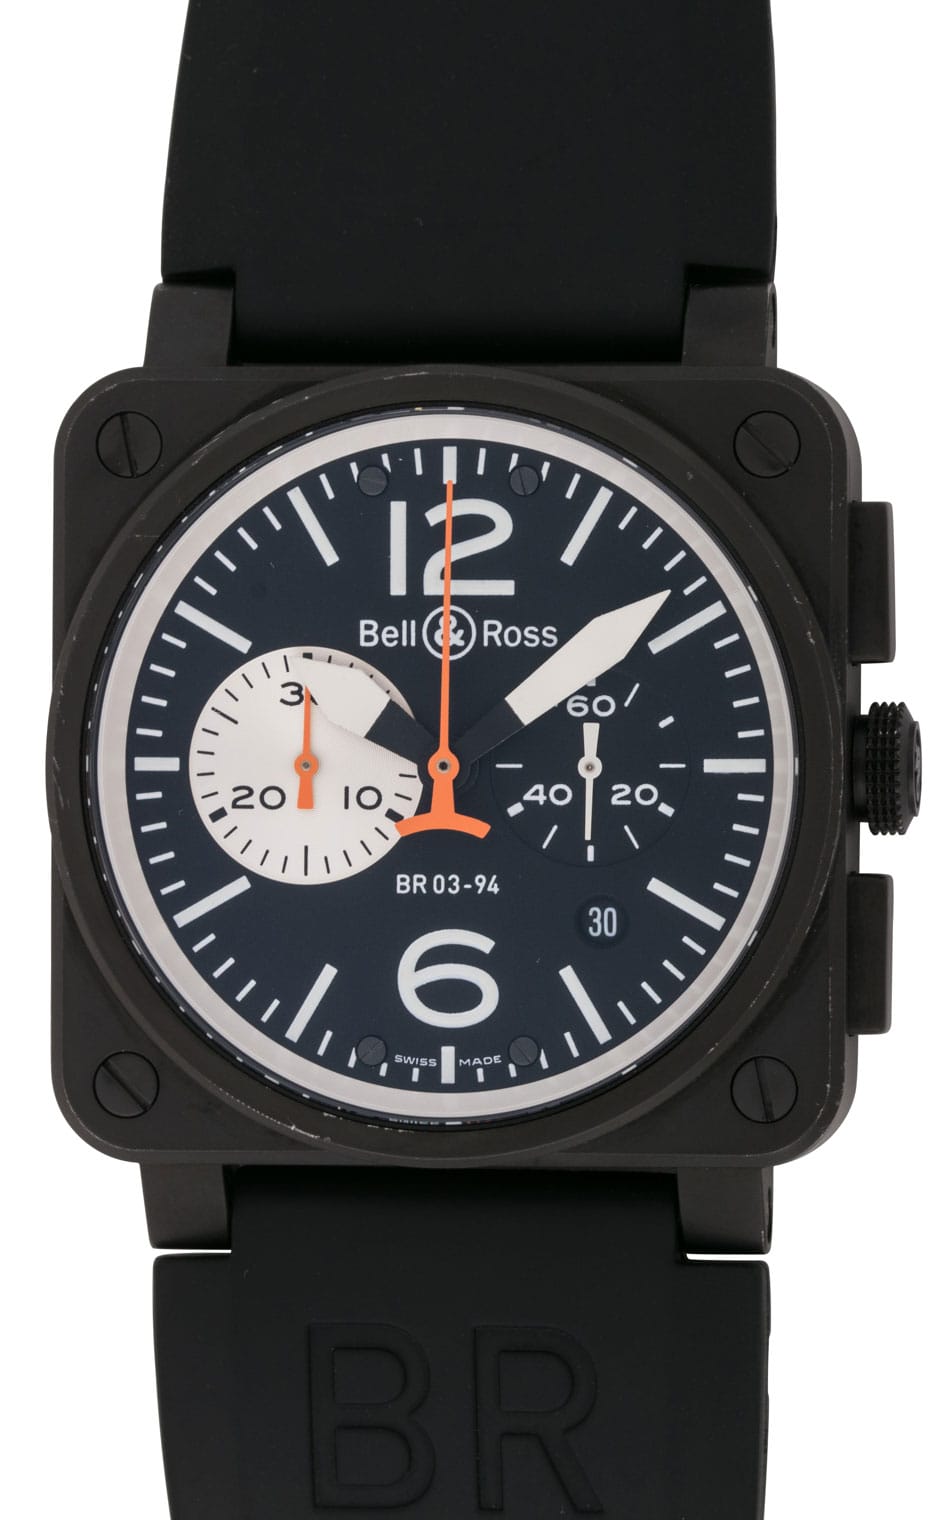 Bell & Ross - BR 03-94 Black and White Carbon Chronograph